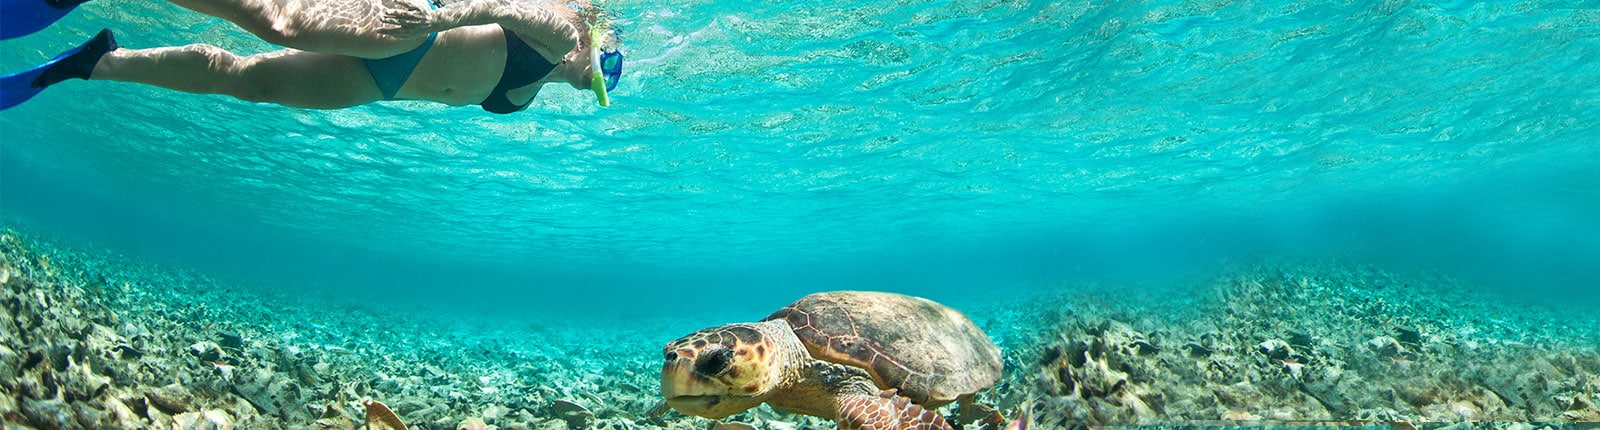 Snorkeling in the blue waters with a turtle in Belize